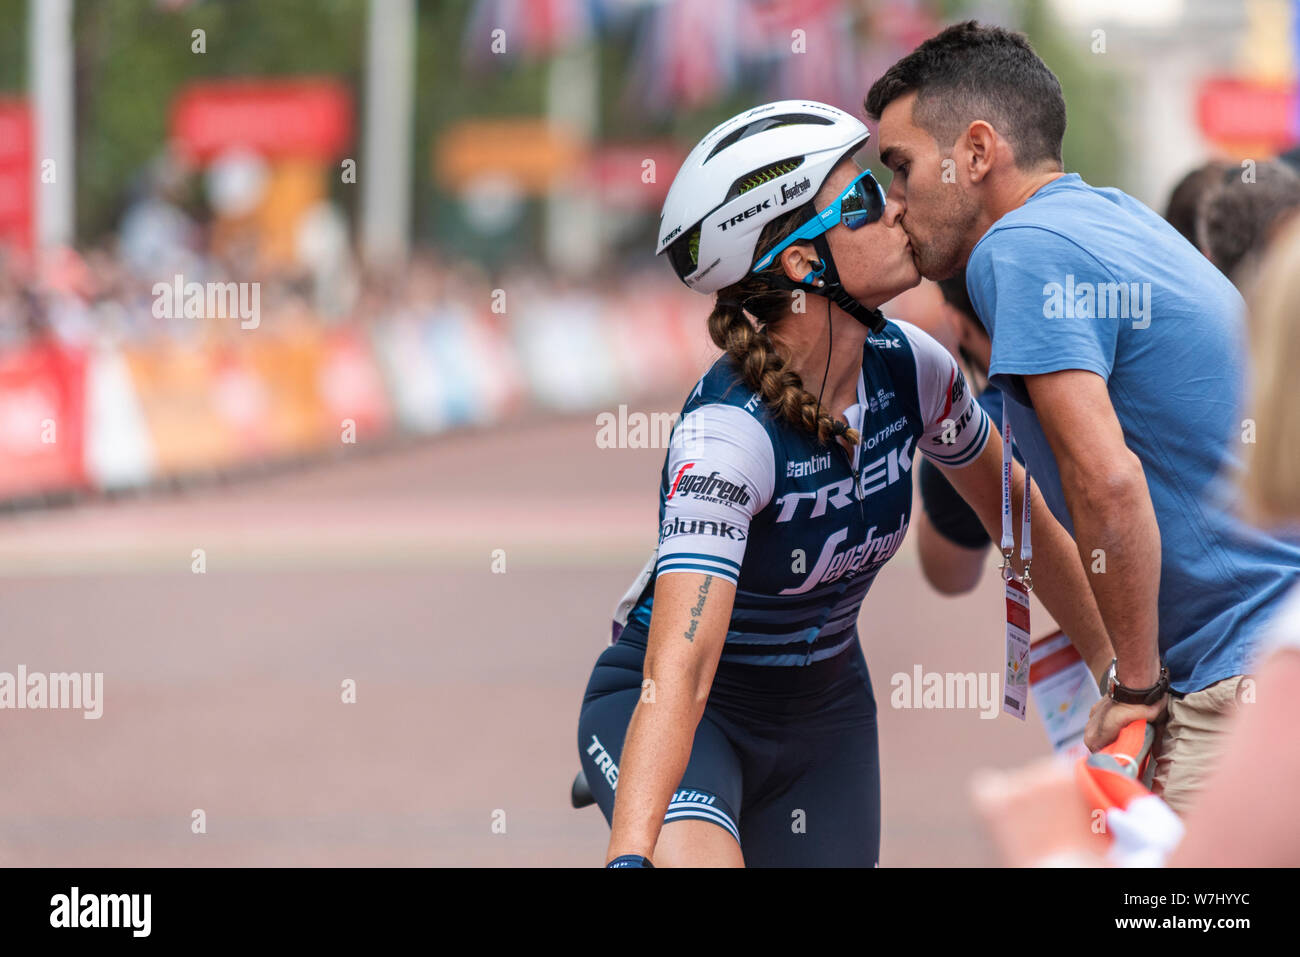 Audrey Cordon-Ragot of Trek Segafredo getting a kiss after racing in the  Prudential RideLondon Classique cycle race in London. Female cyclist rider  Stock Photo - Alamy